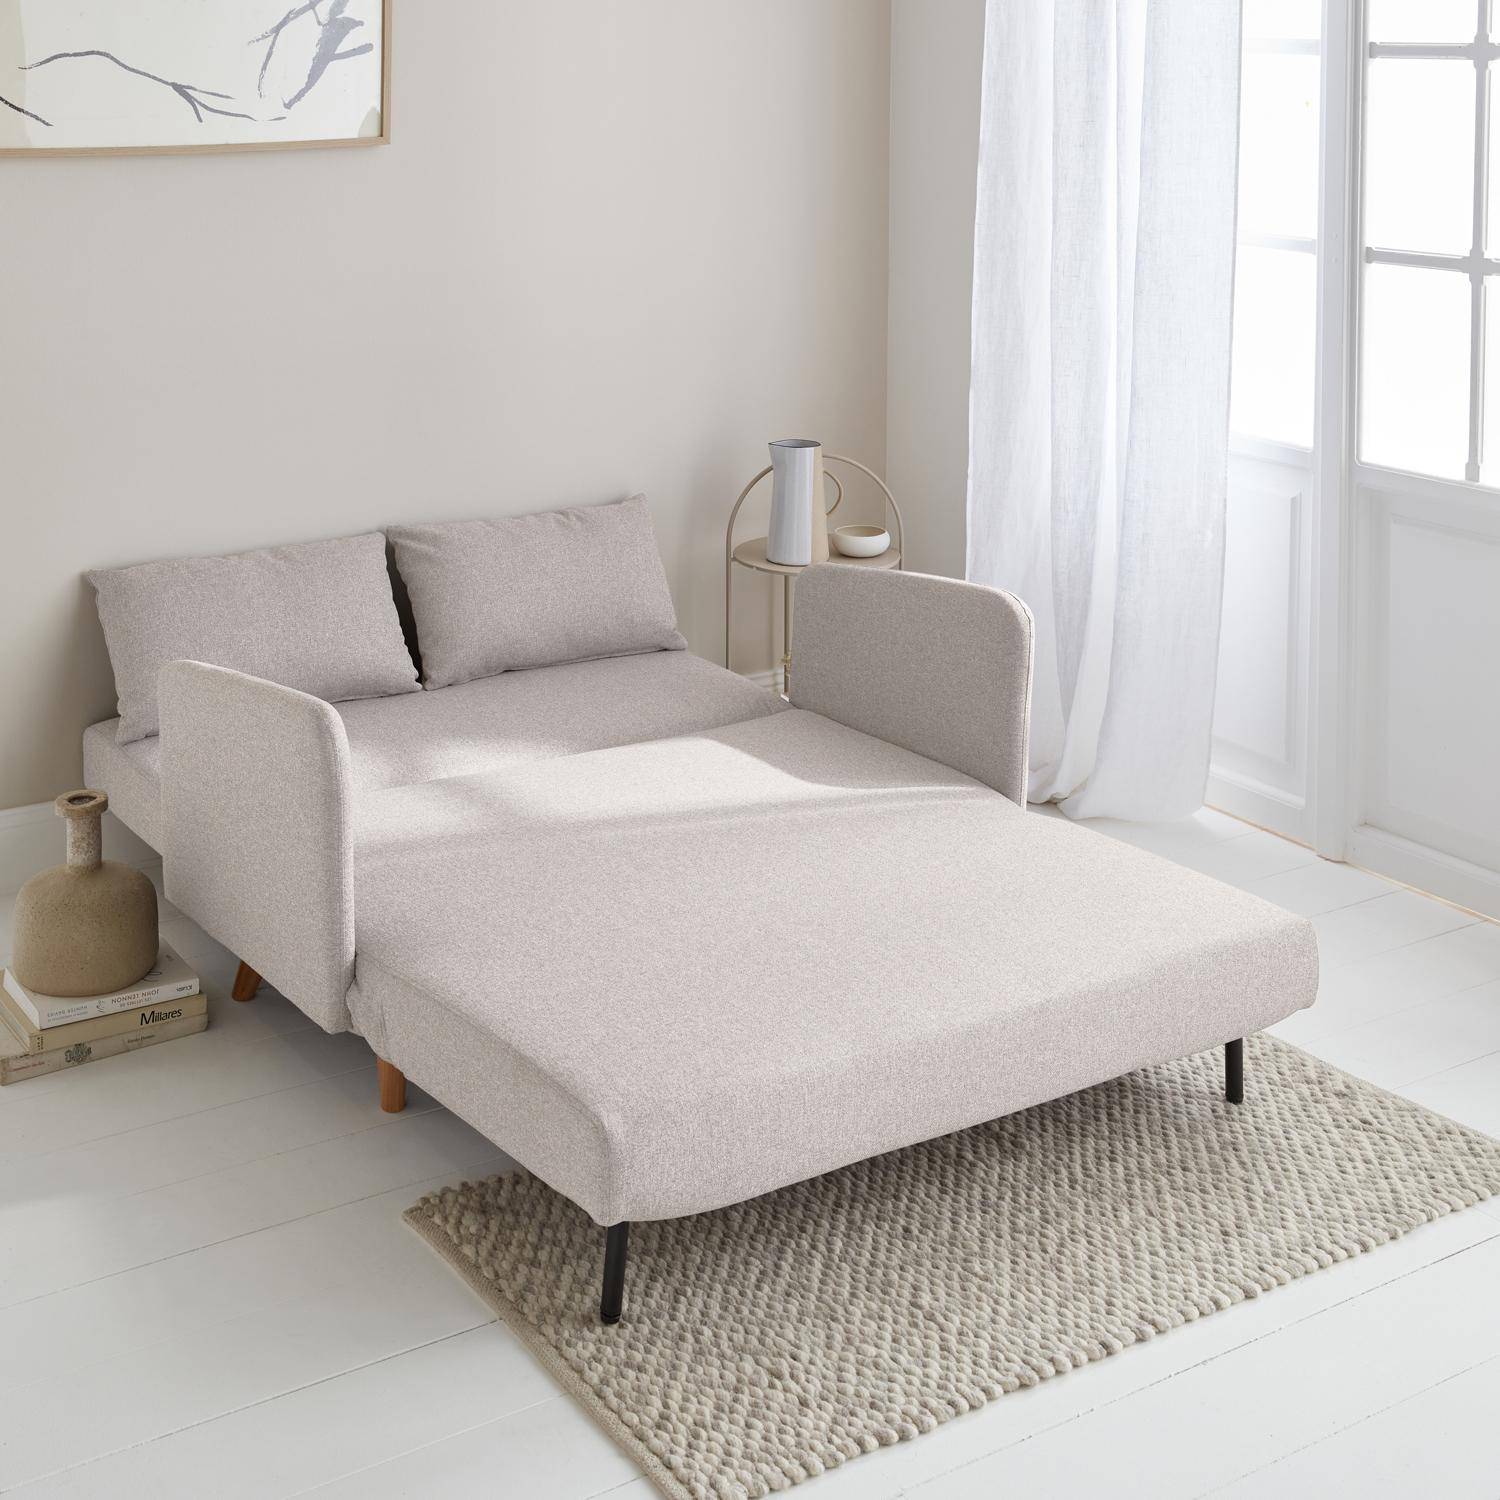 Sleeper, 2-Seater convertible sofa with wooden legs, L130xl81xH82cm, beige Photo2